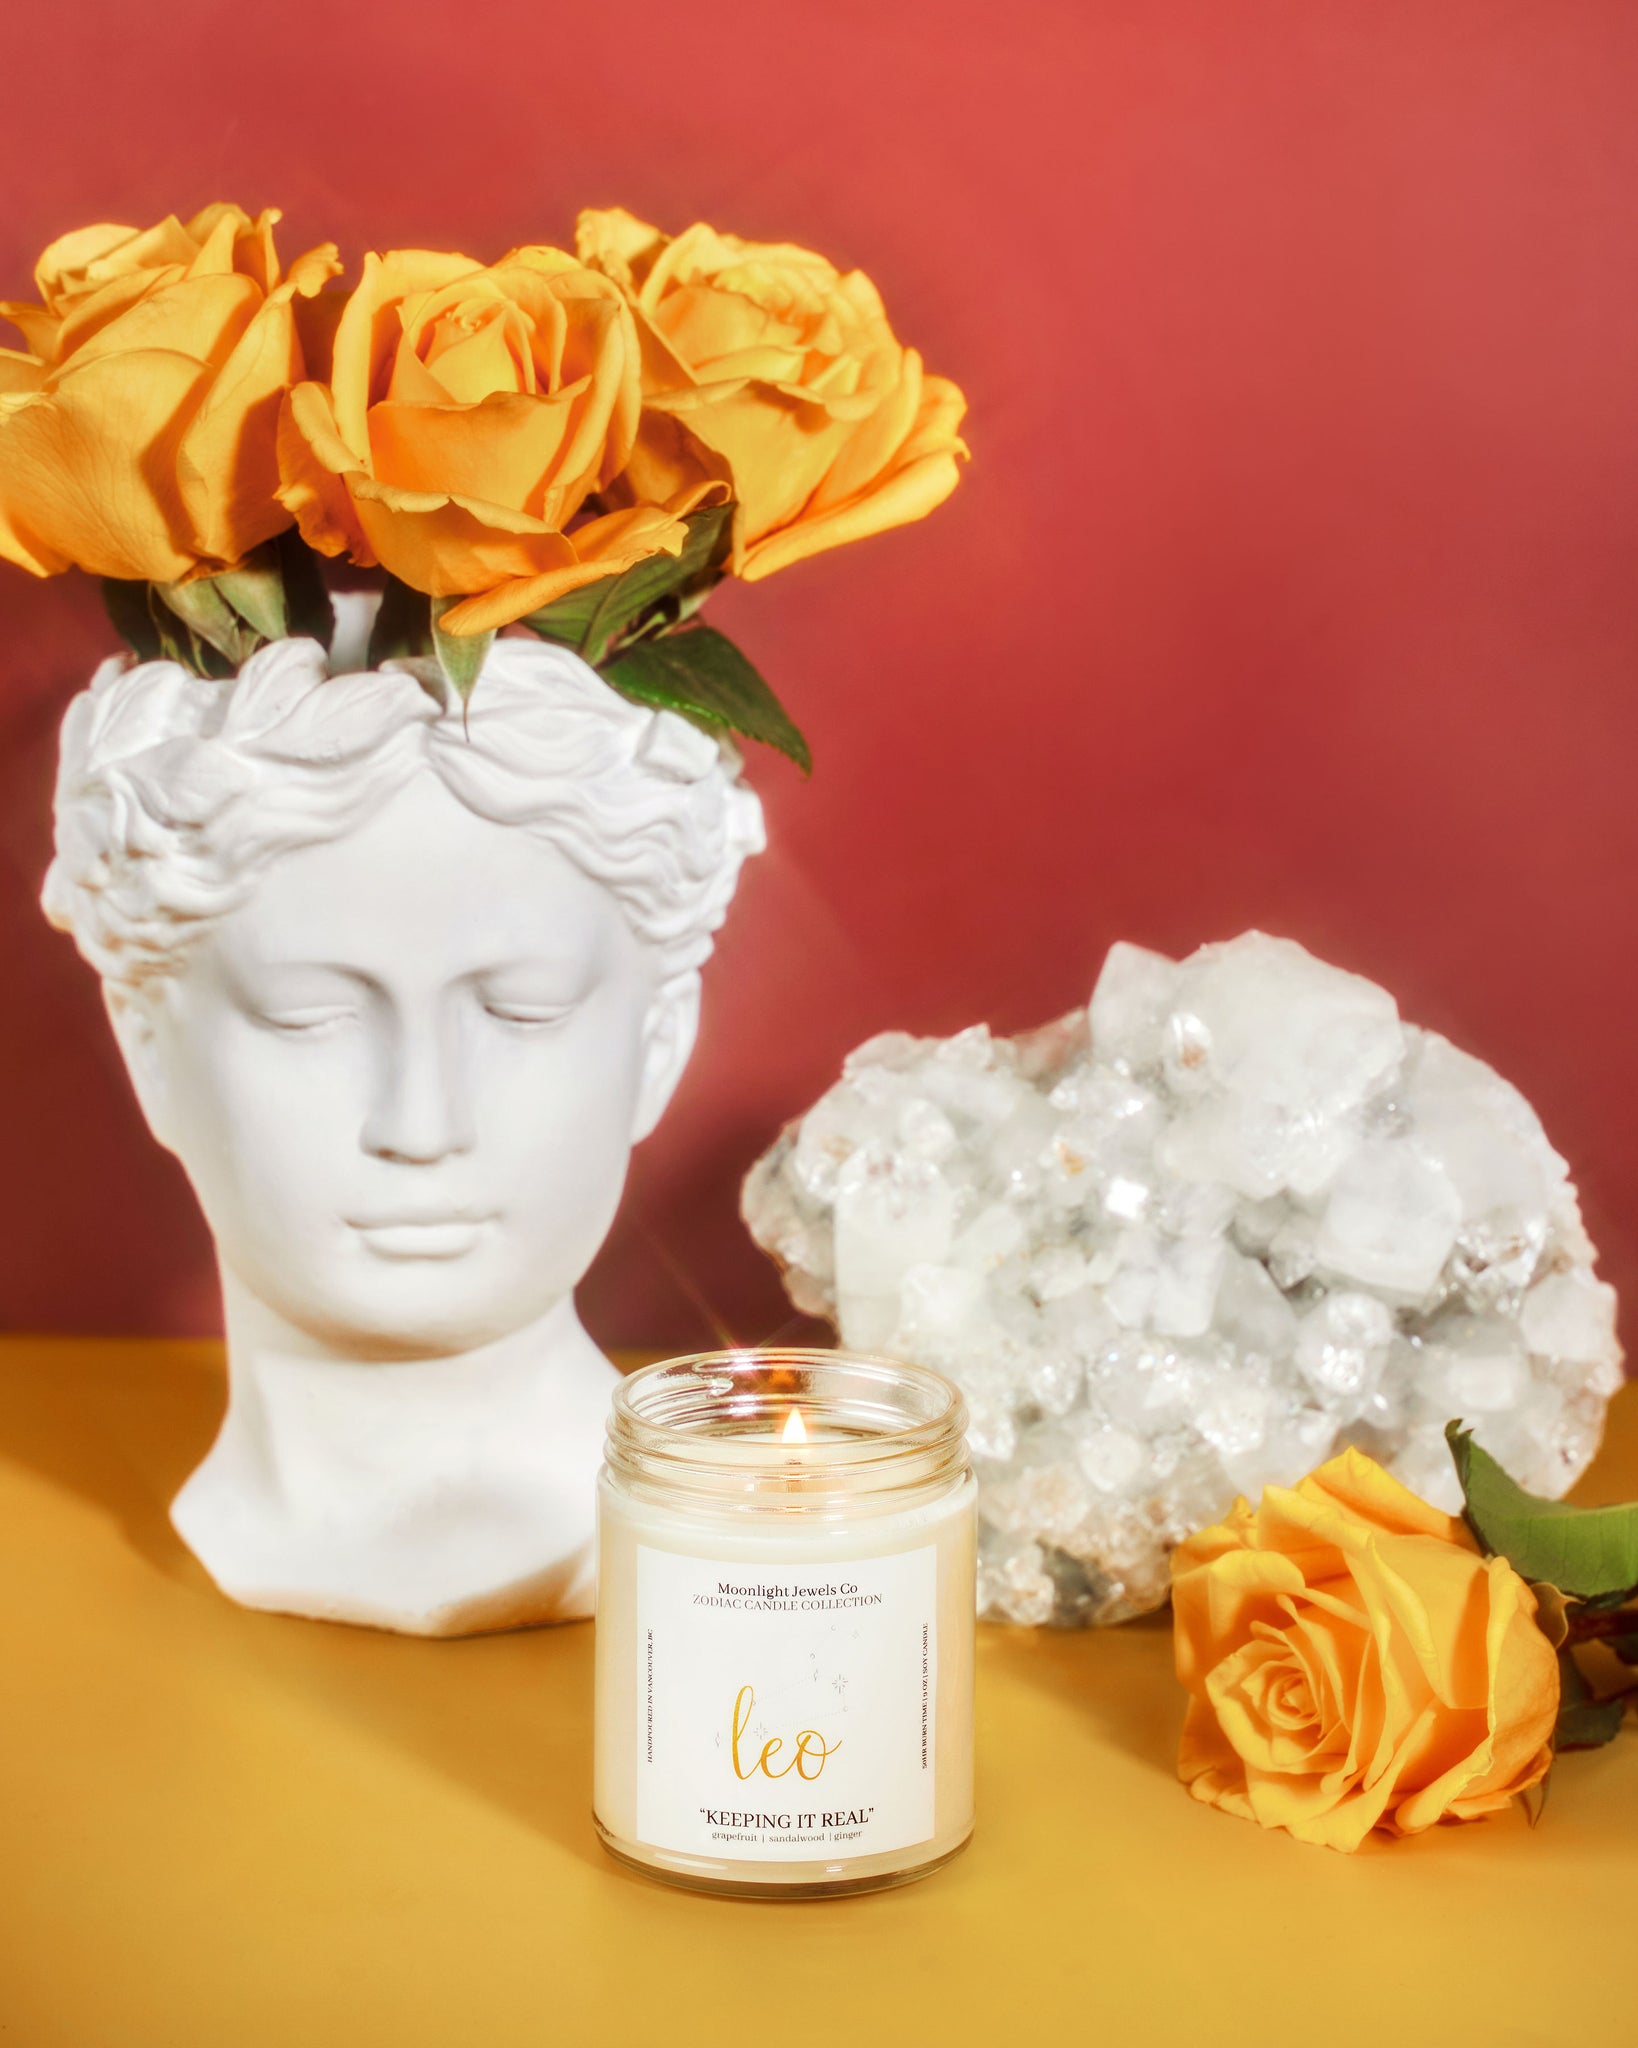 Leo "Keeping It Real" Zodiac Candle